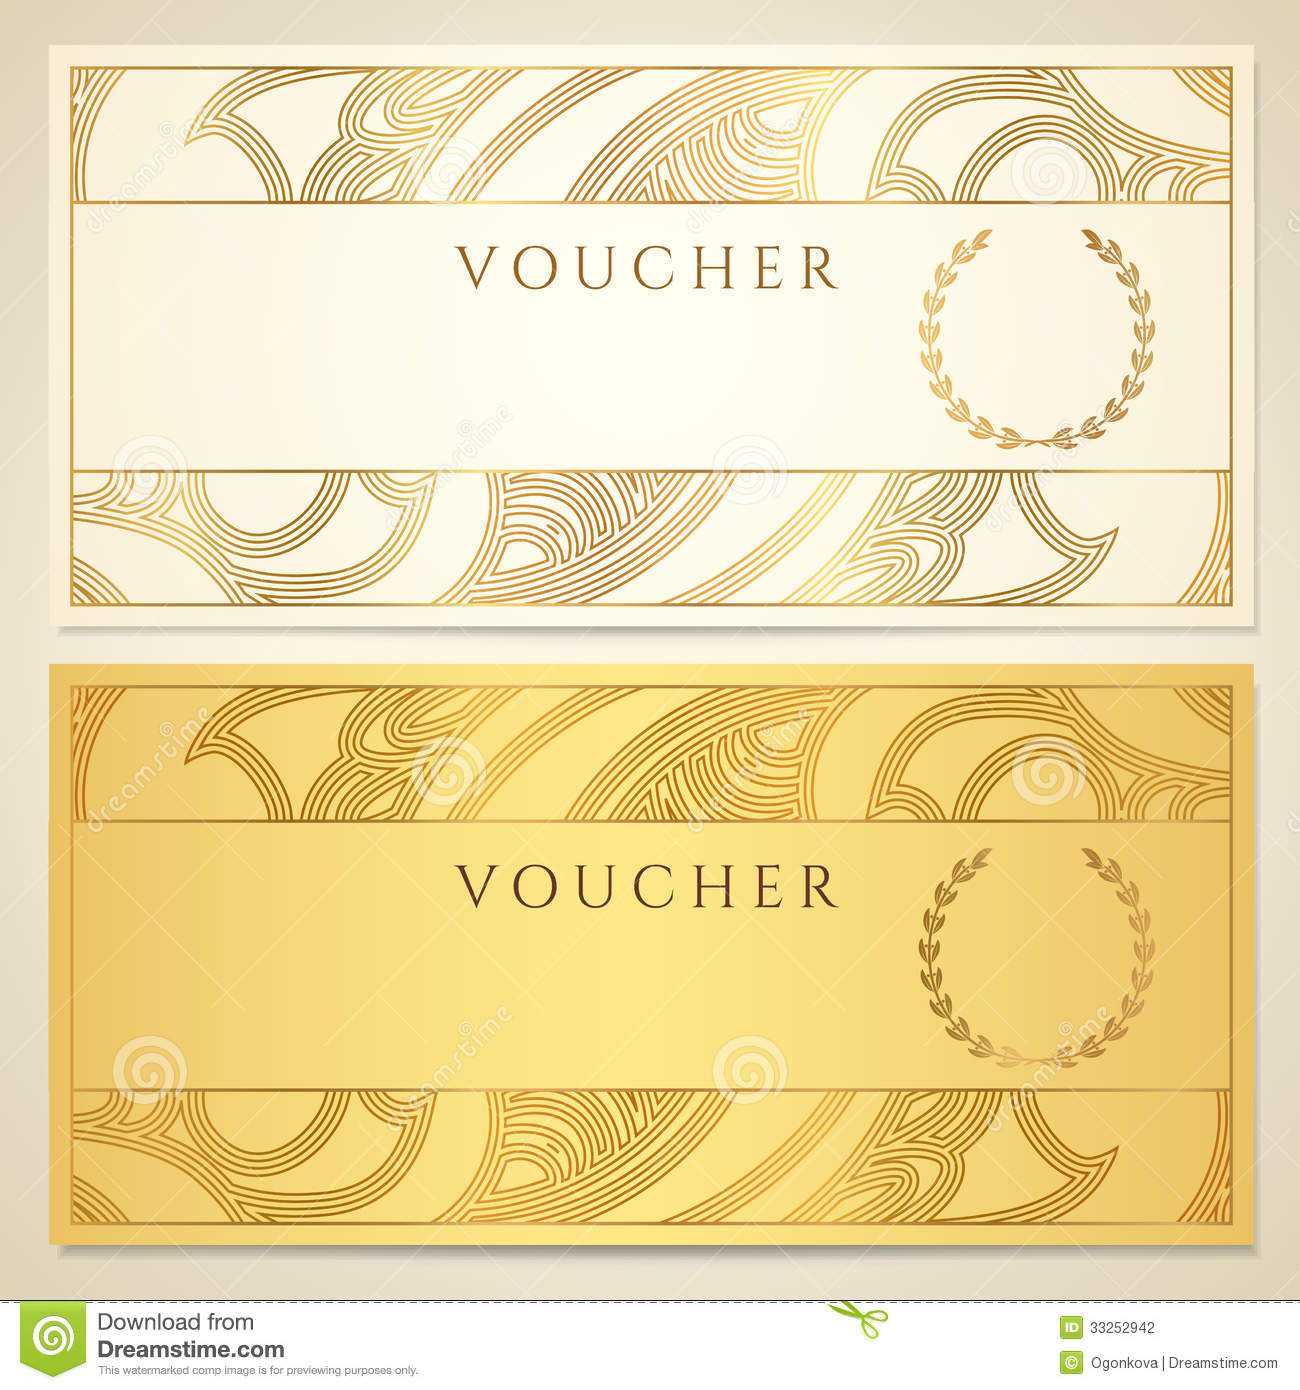 Clipart Gift Certificate Template Intended For Dinner Certificate Template Free